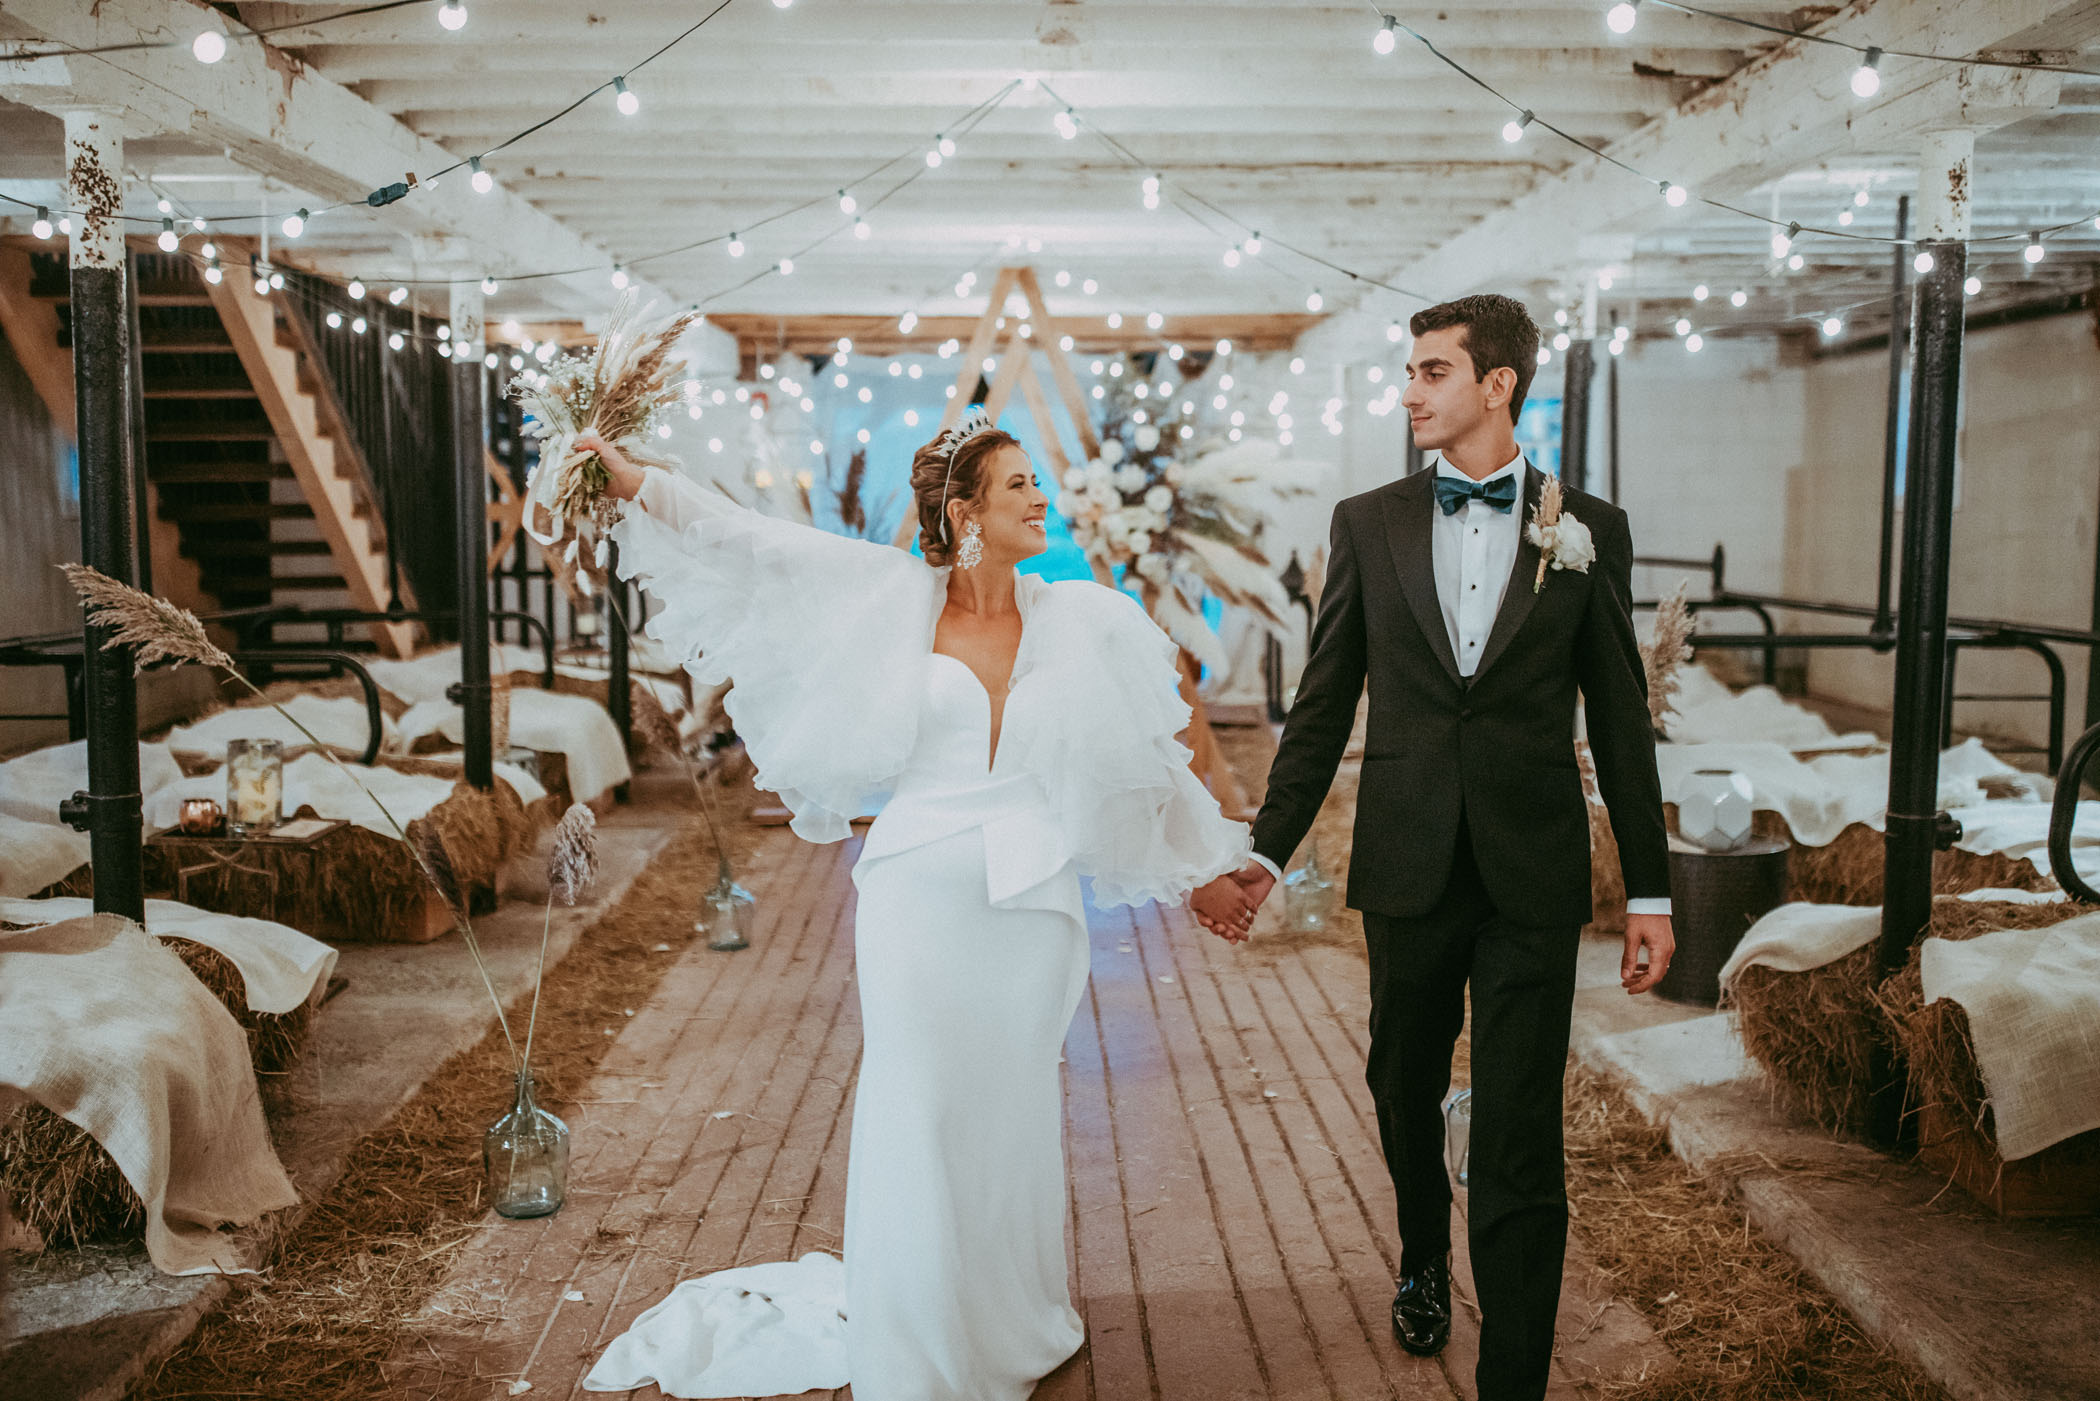 Scandinavian Style Meets Glamping Chic in This Winter Wedding